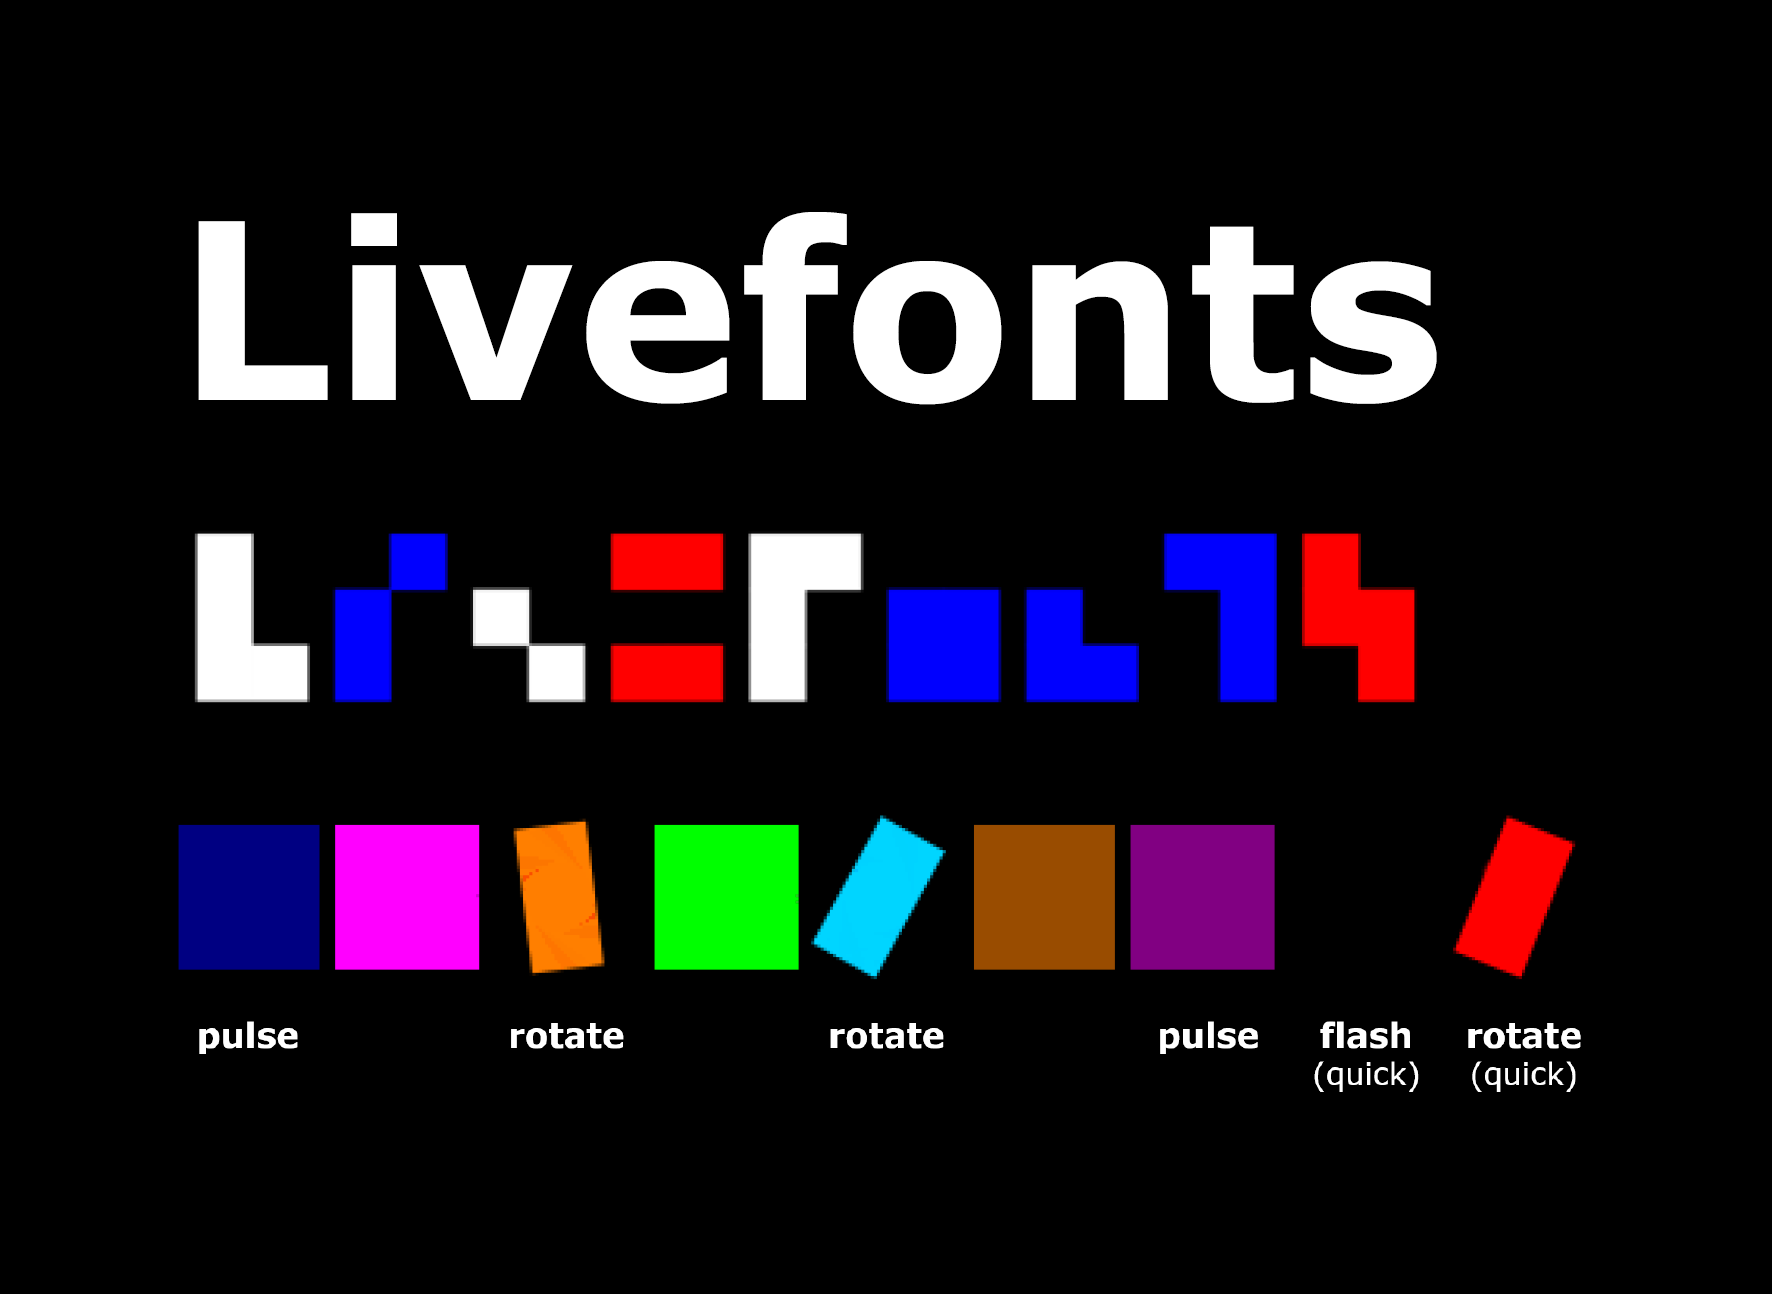 More information about "Livefonts – animated fonts for low vision readers"